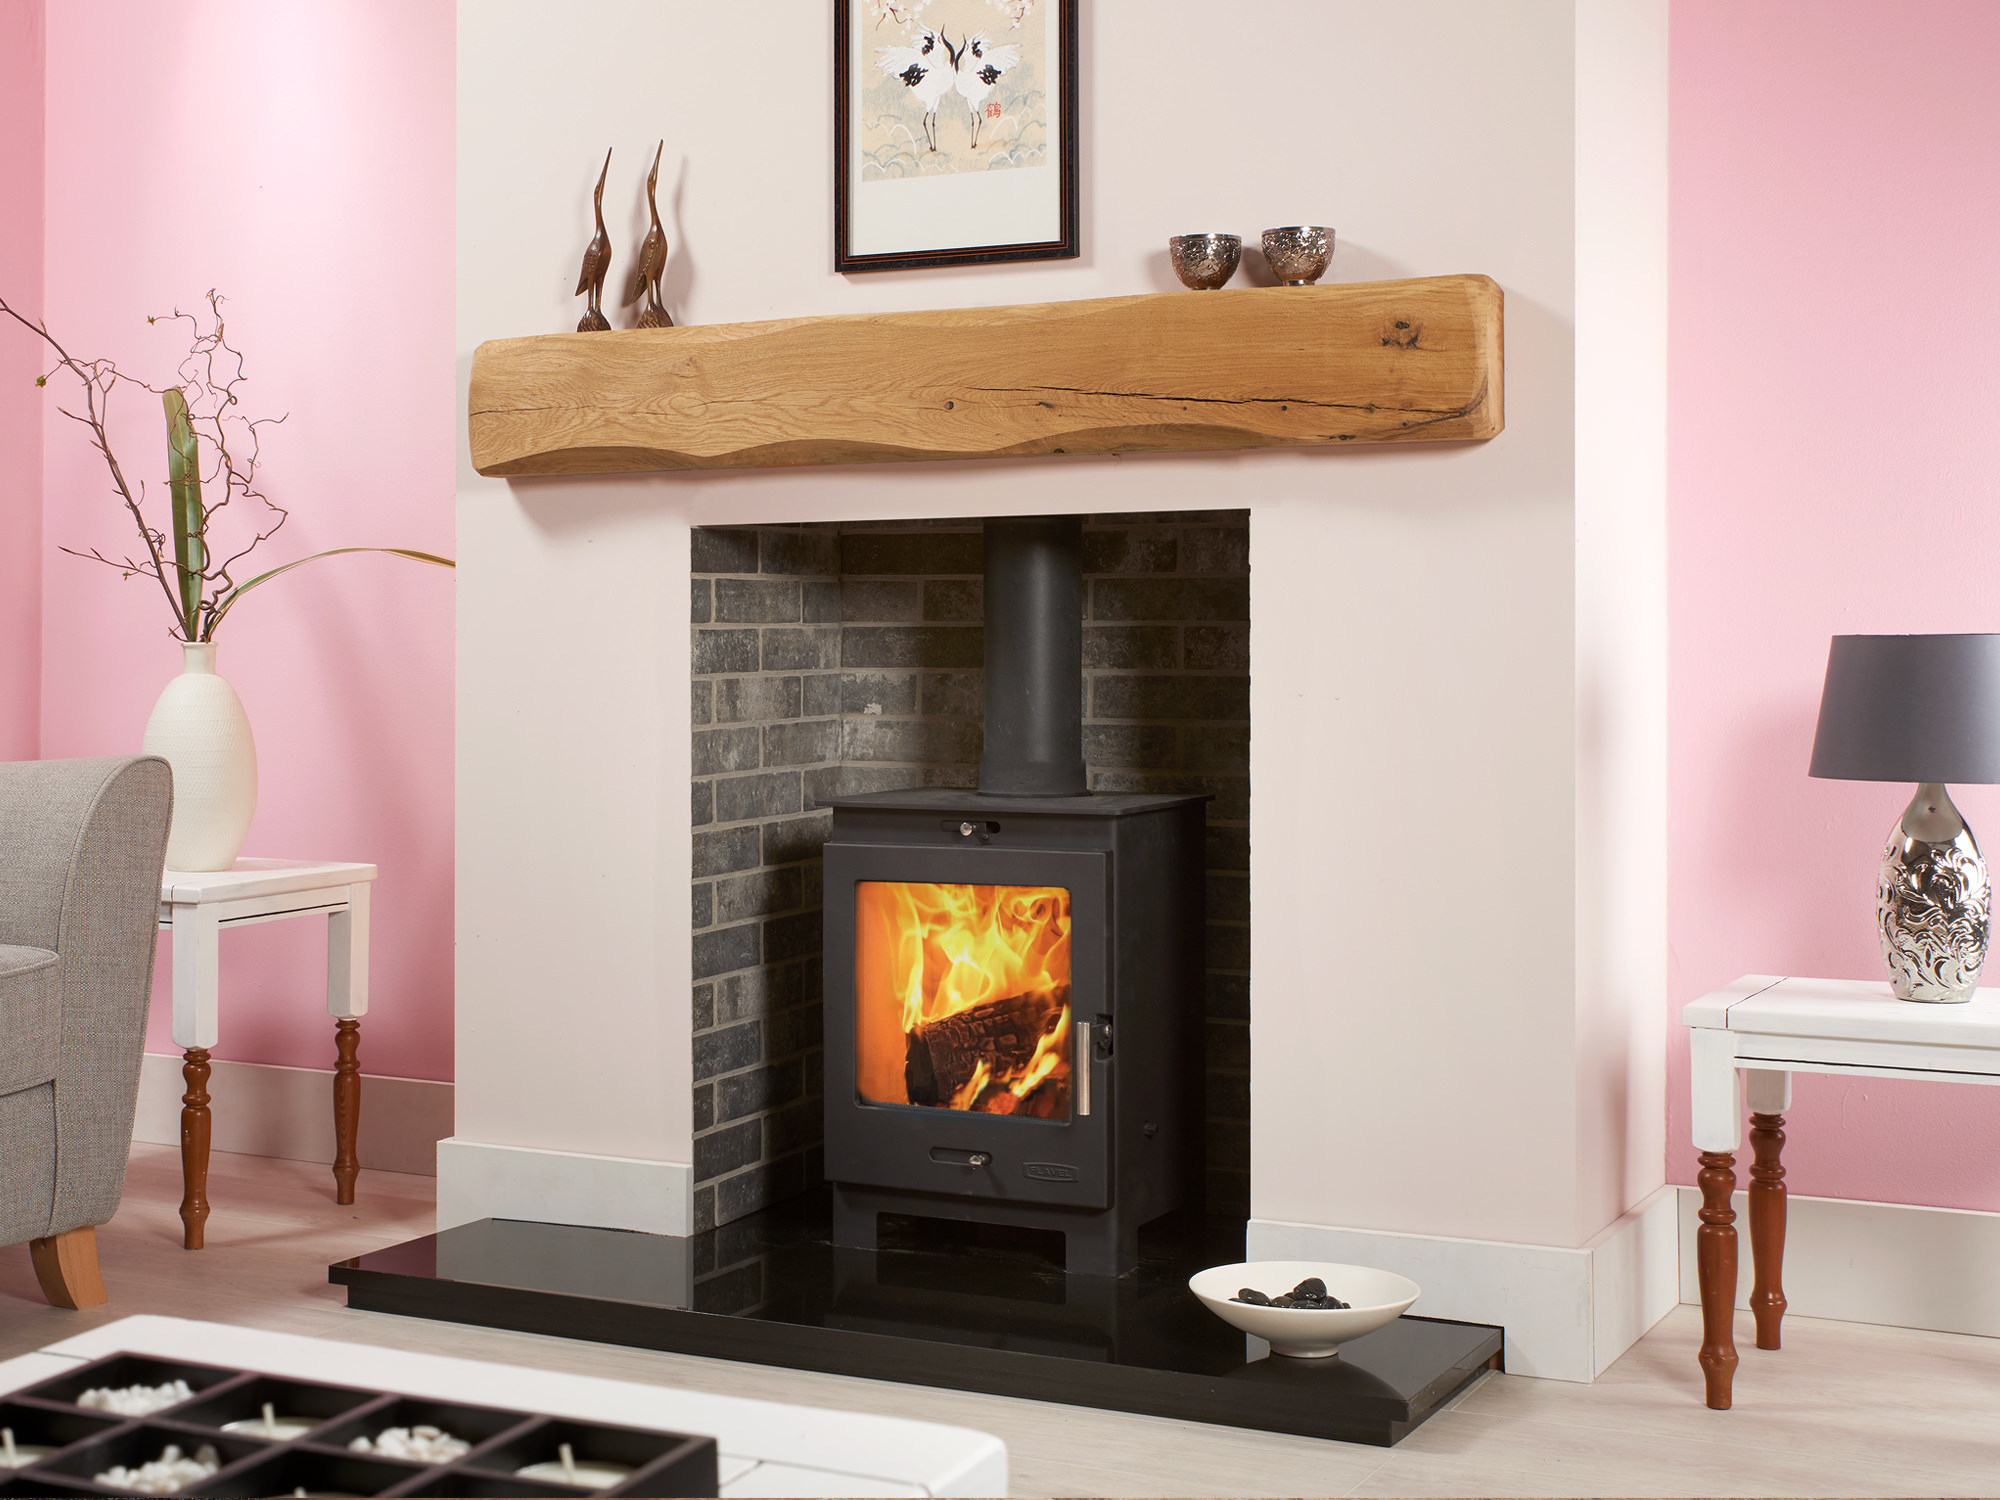 waney-edge-beam-with-distressed-style-above-wood-burner